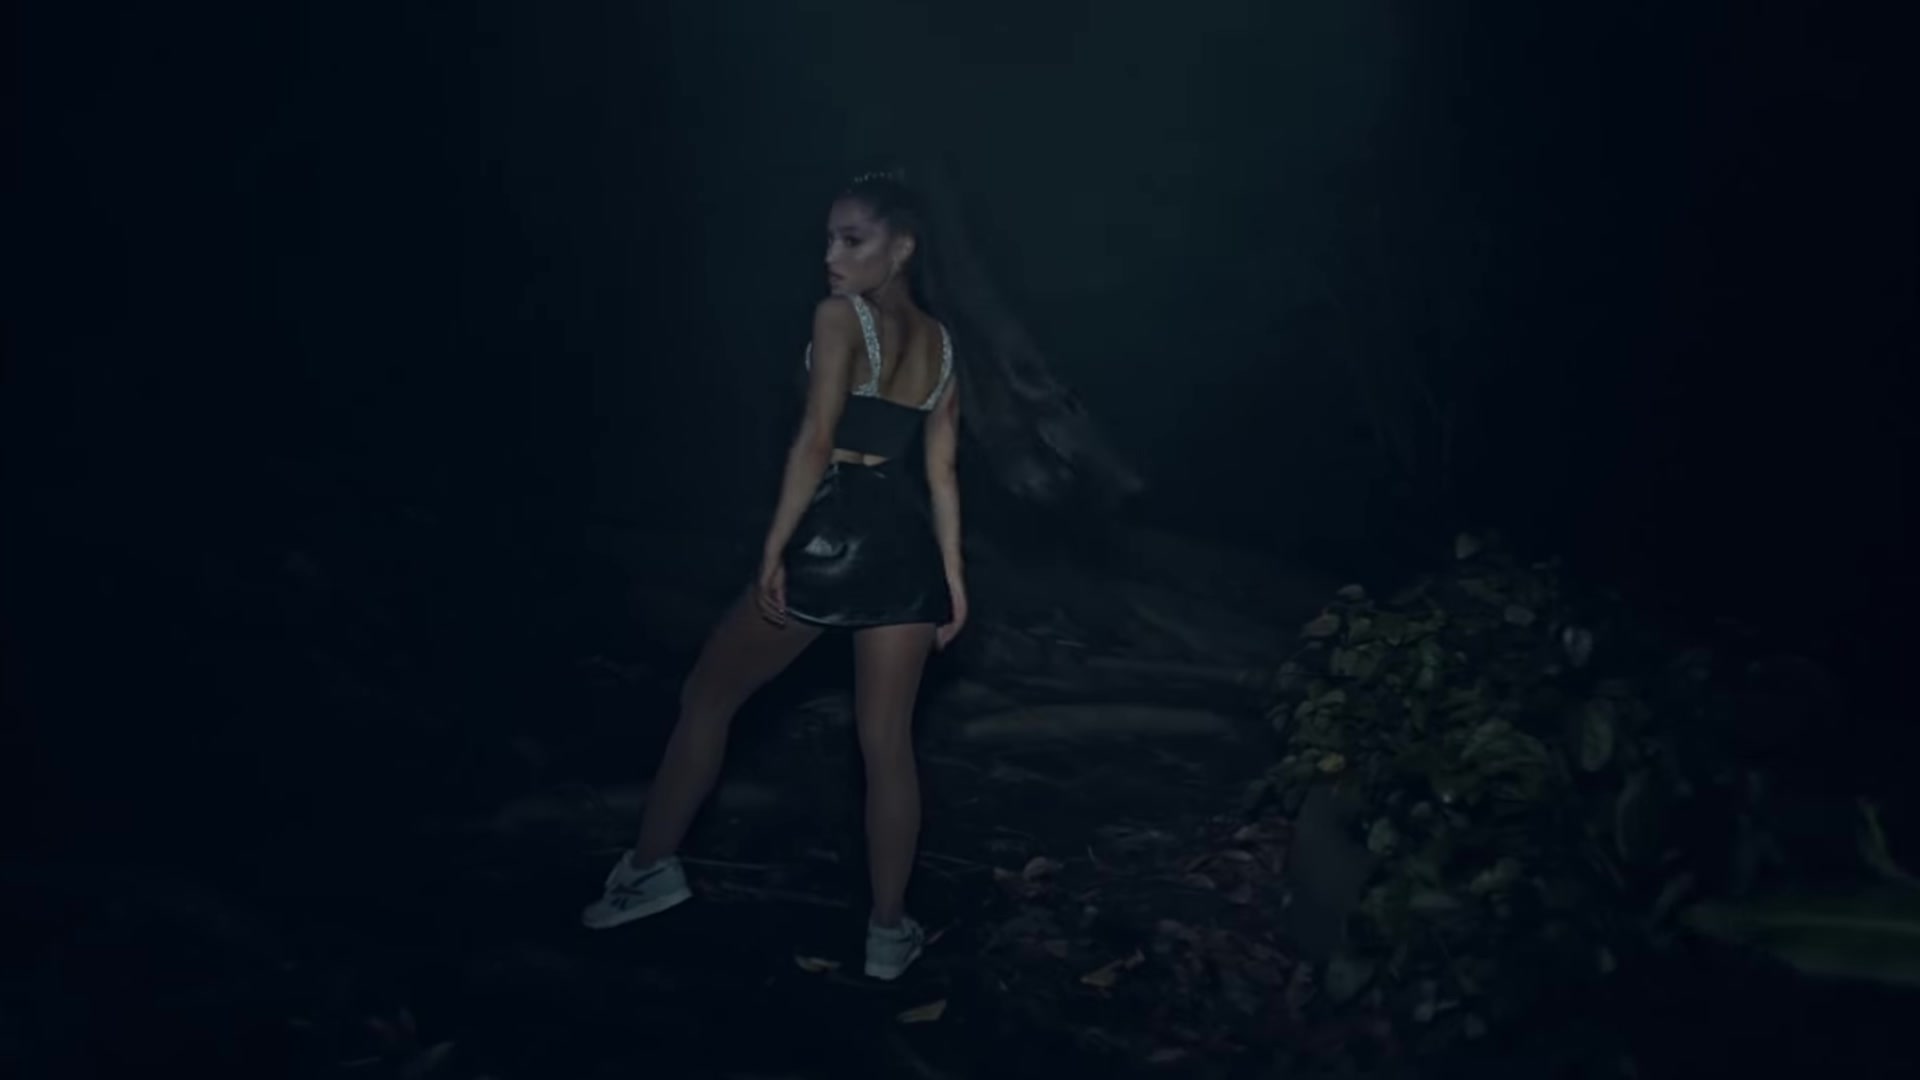 Reebok Sneakers Worn by Ariana Grande in The Light Is Coming (2018) Official Music Video1920 x 1080